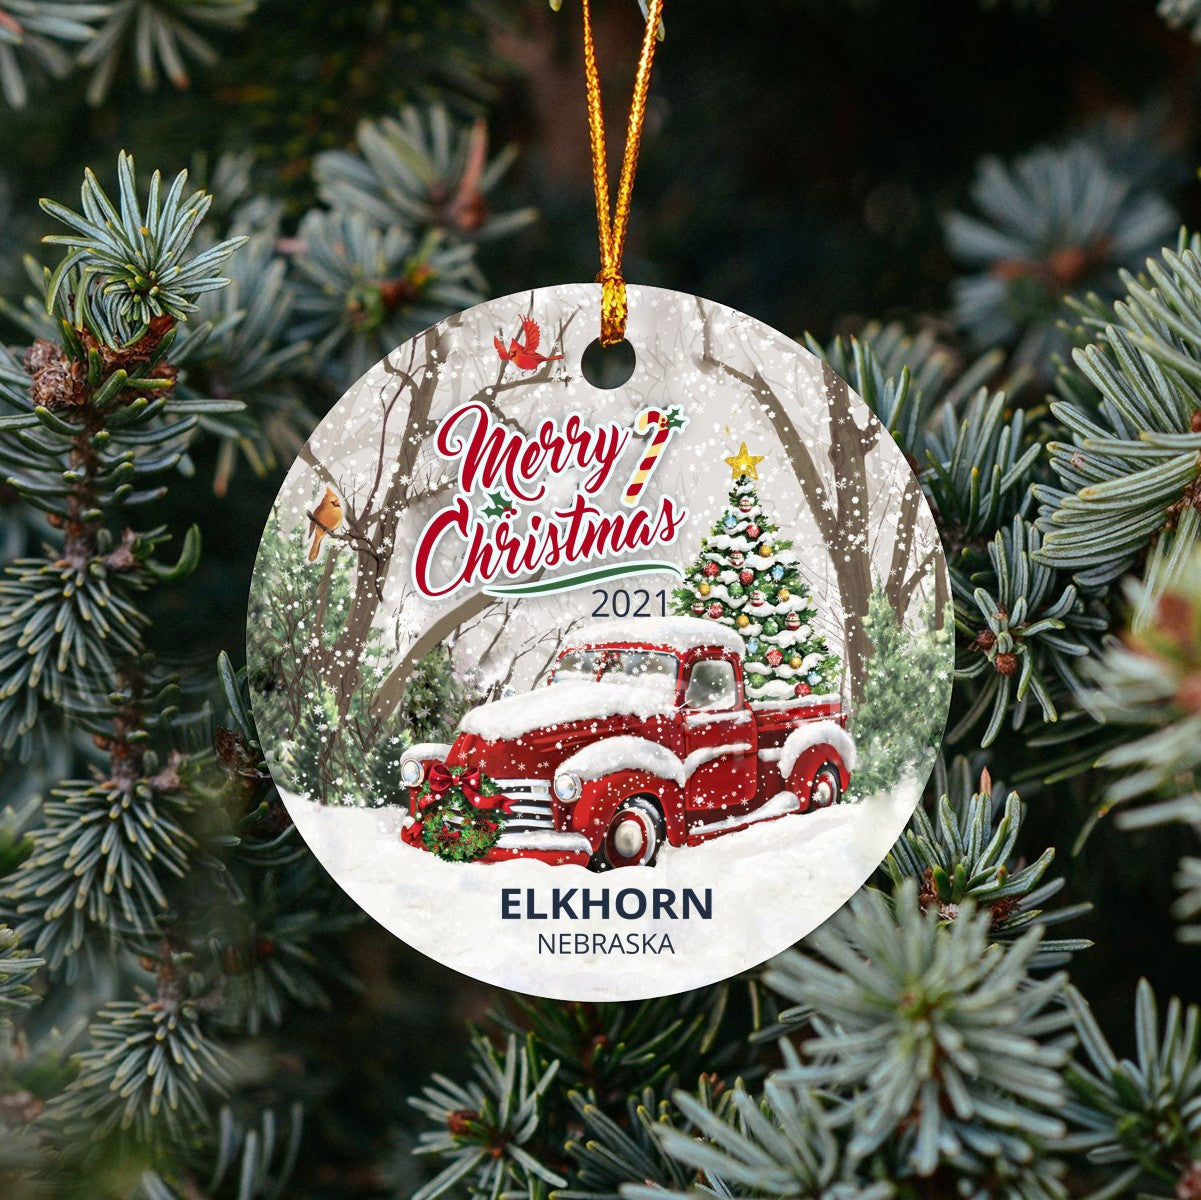 Christmas Tree Ornaments Elkhorn - Ornament Customize With Name City And State Elkhorn Nebraska NE - Red Truck Xmas Ornaments 3'' Plastic Gift For Family, Friend And Housewarming